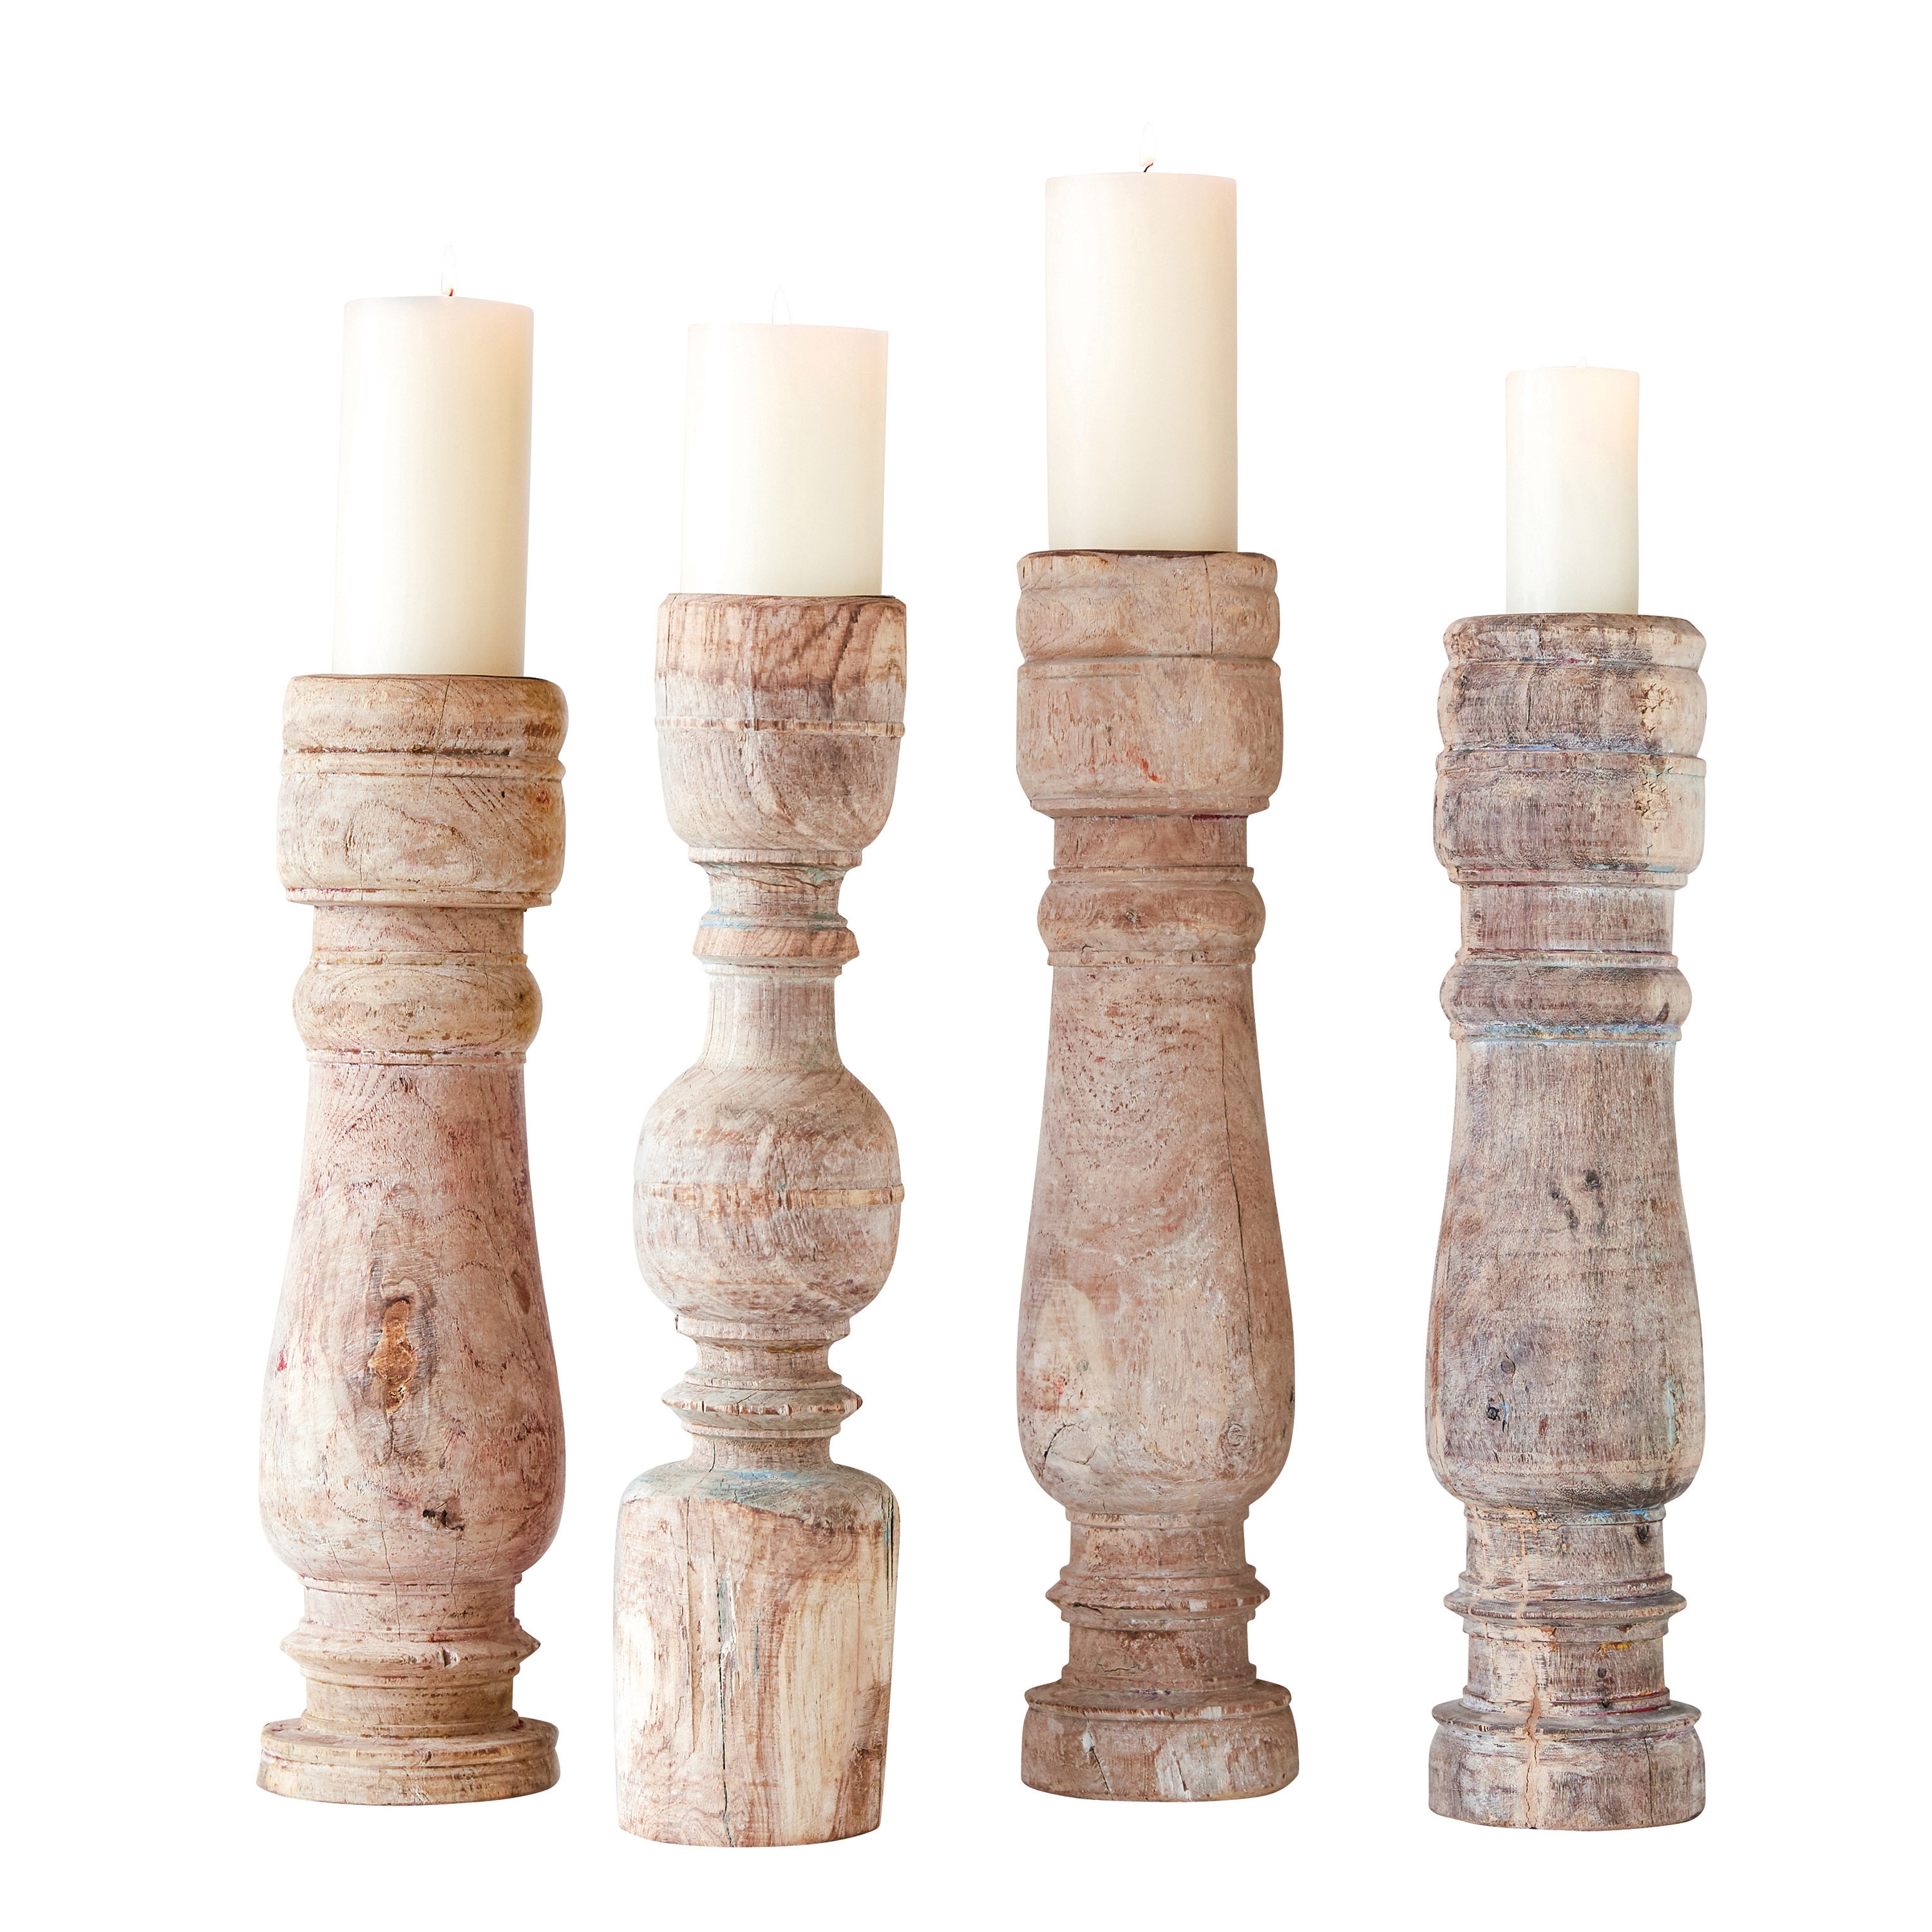 Found Hand Carved Wood Table Leg Pillar Candleholder - Image 0